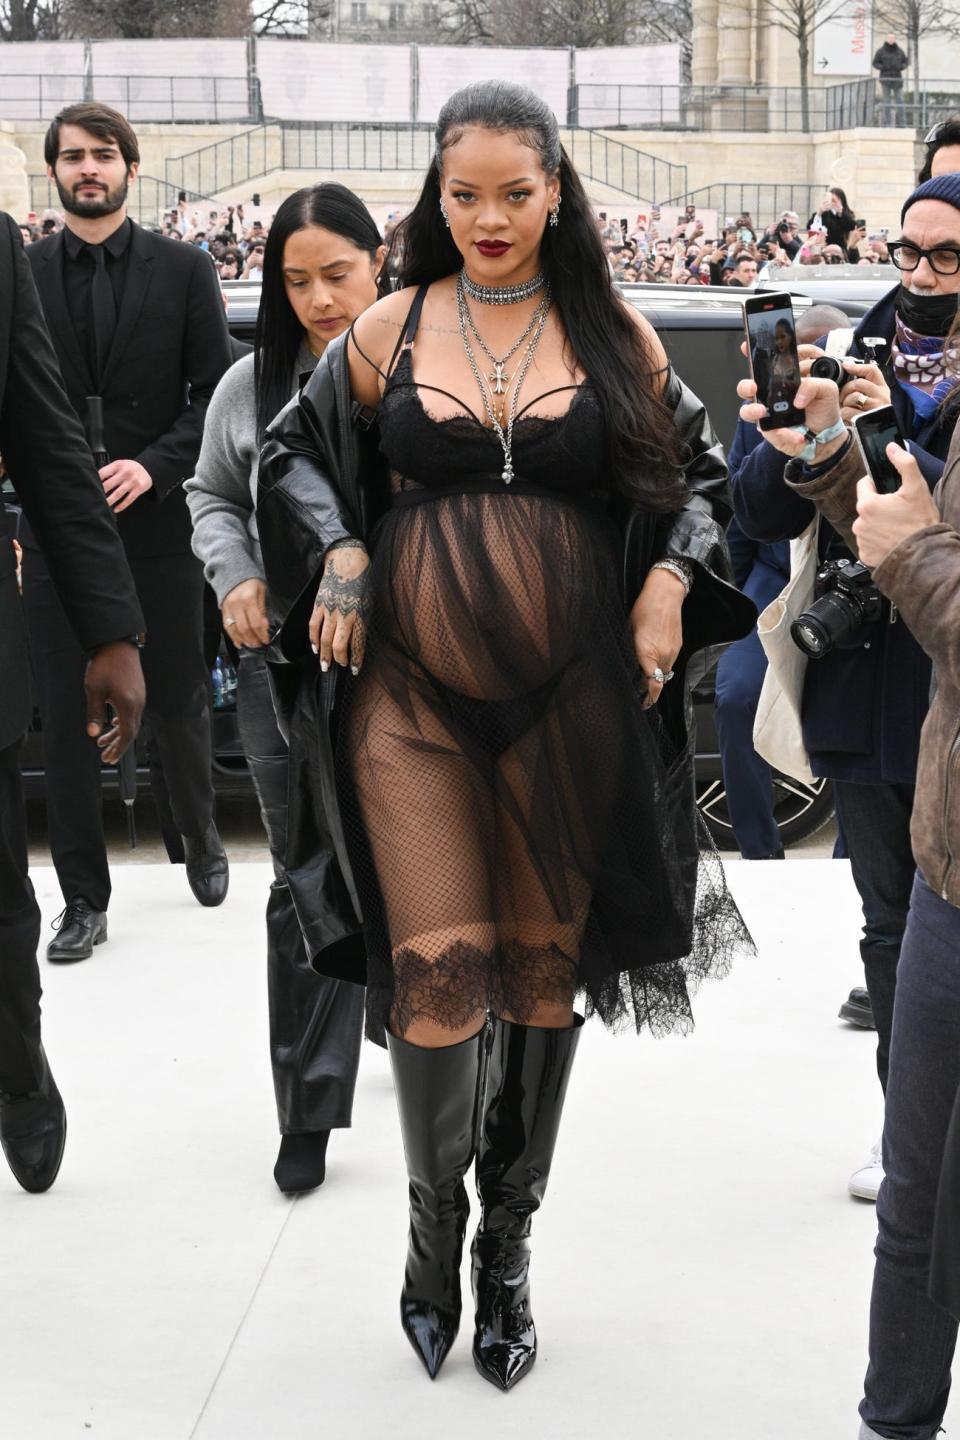 Rihanna in a black sheer mesh dress revealing a bra and underwear underneath. She has a black leather jacket worn off-the-shoulder and has knee-high leather pointed boots.